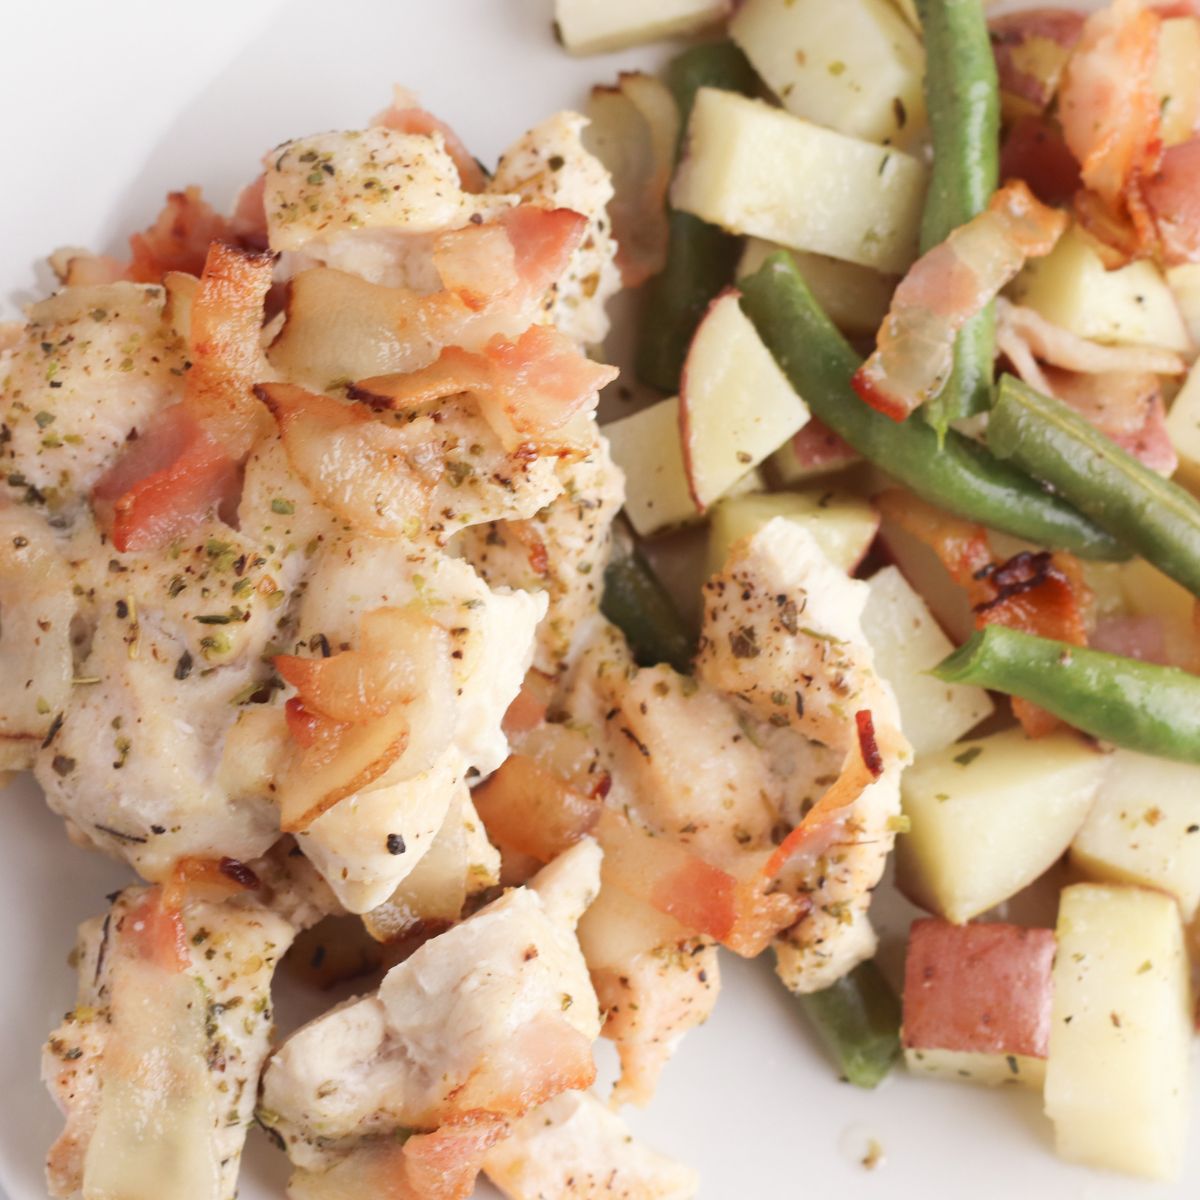 A plate with chicken, green beans and potatoes.